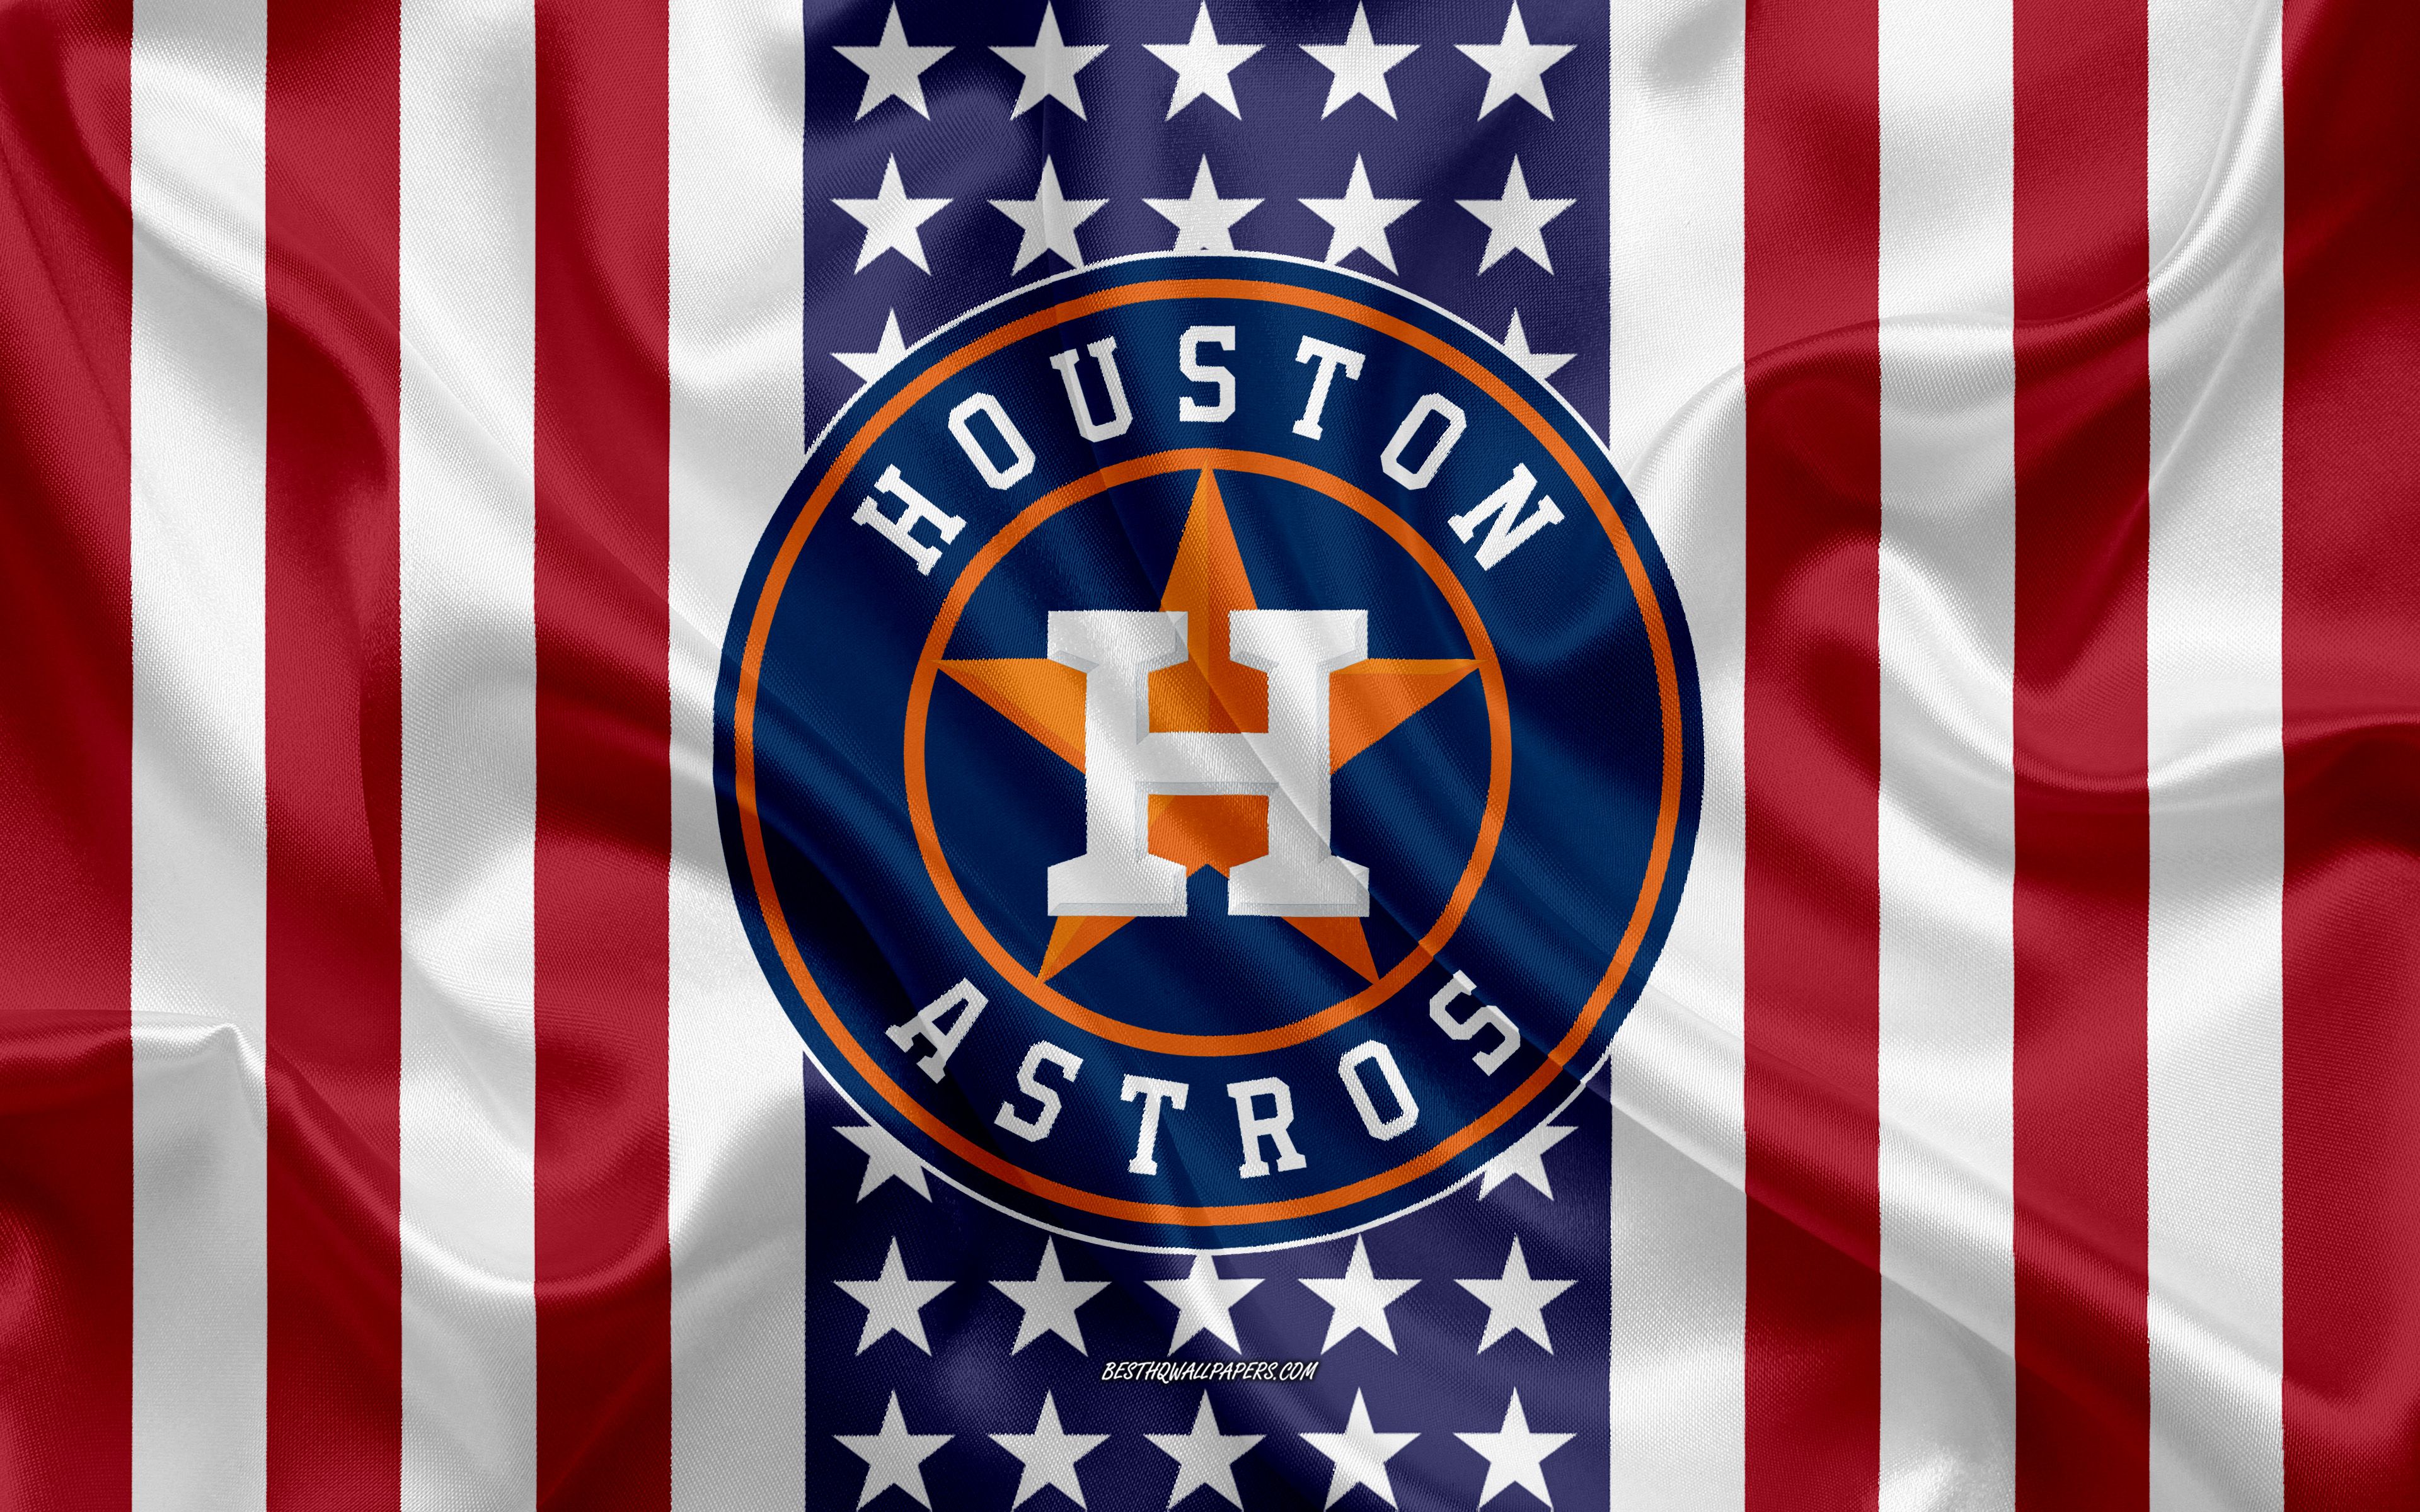 Download Houston Astros wallpaper by Chrisjm3 - 6486 - Free on